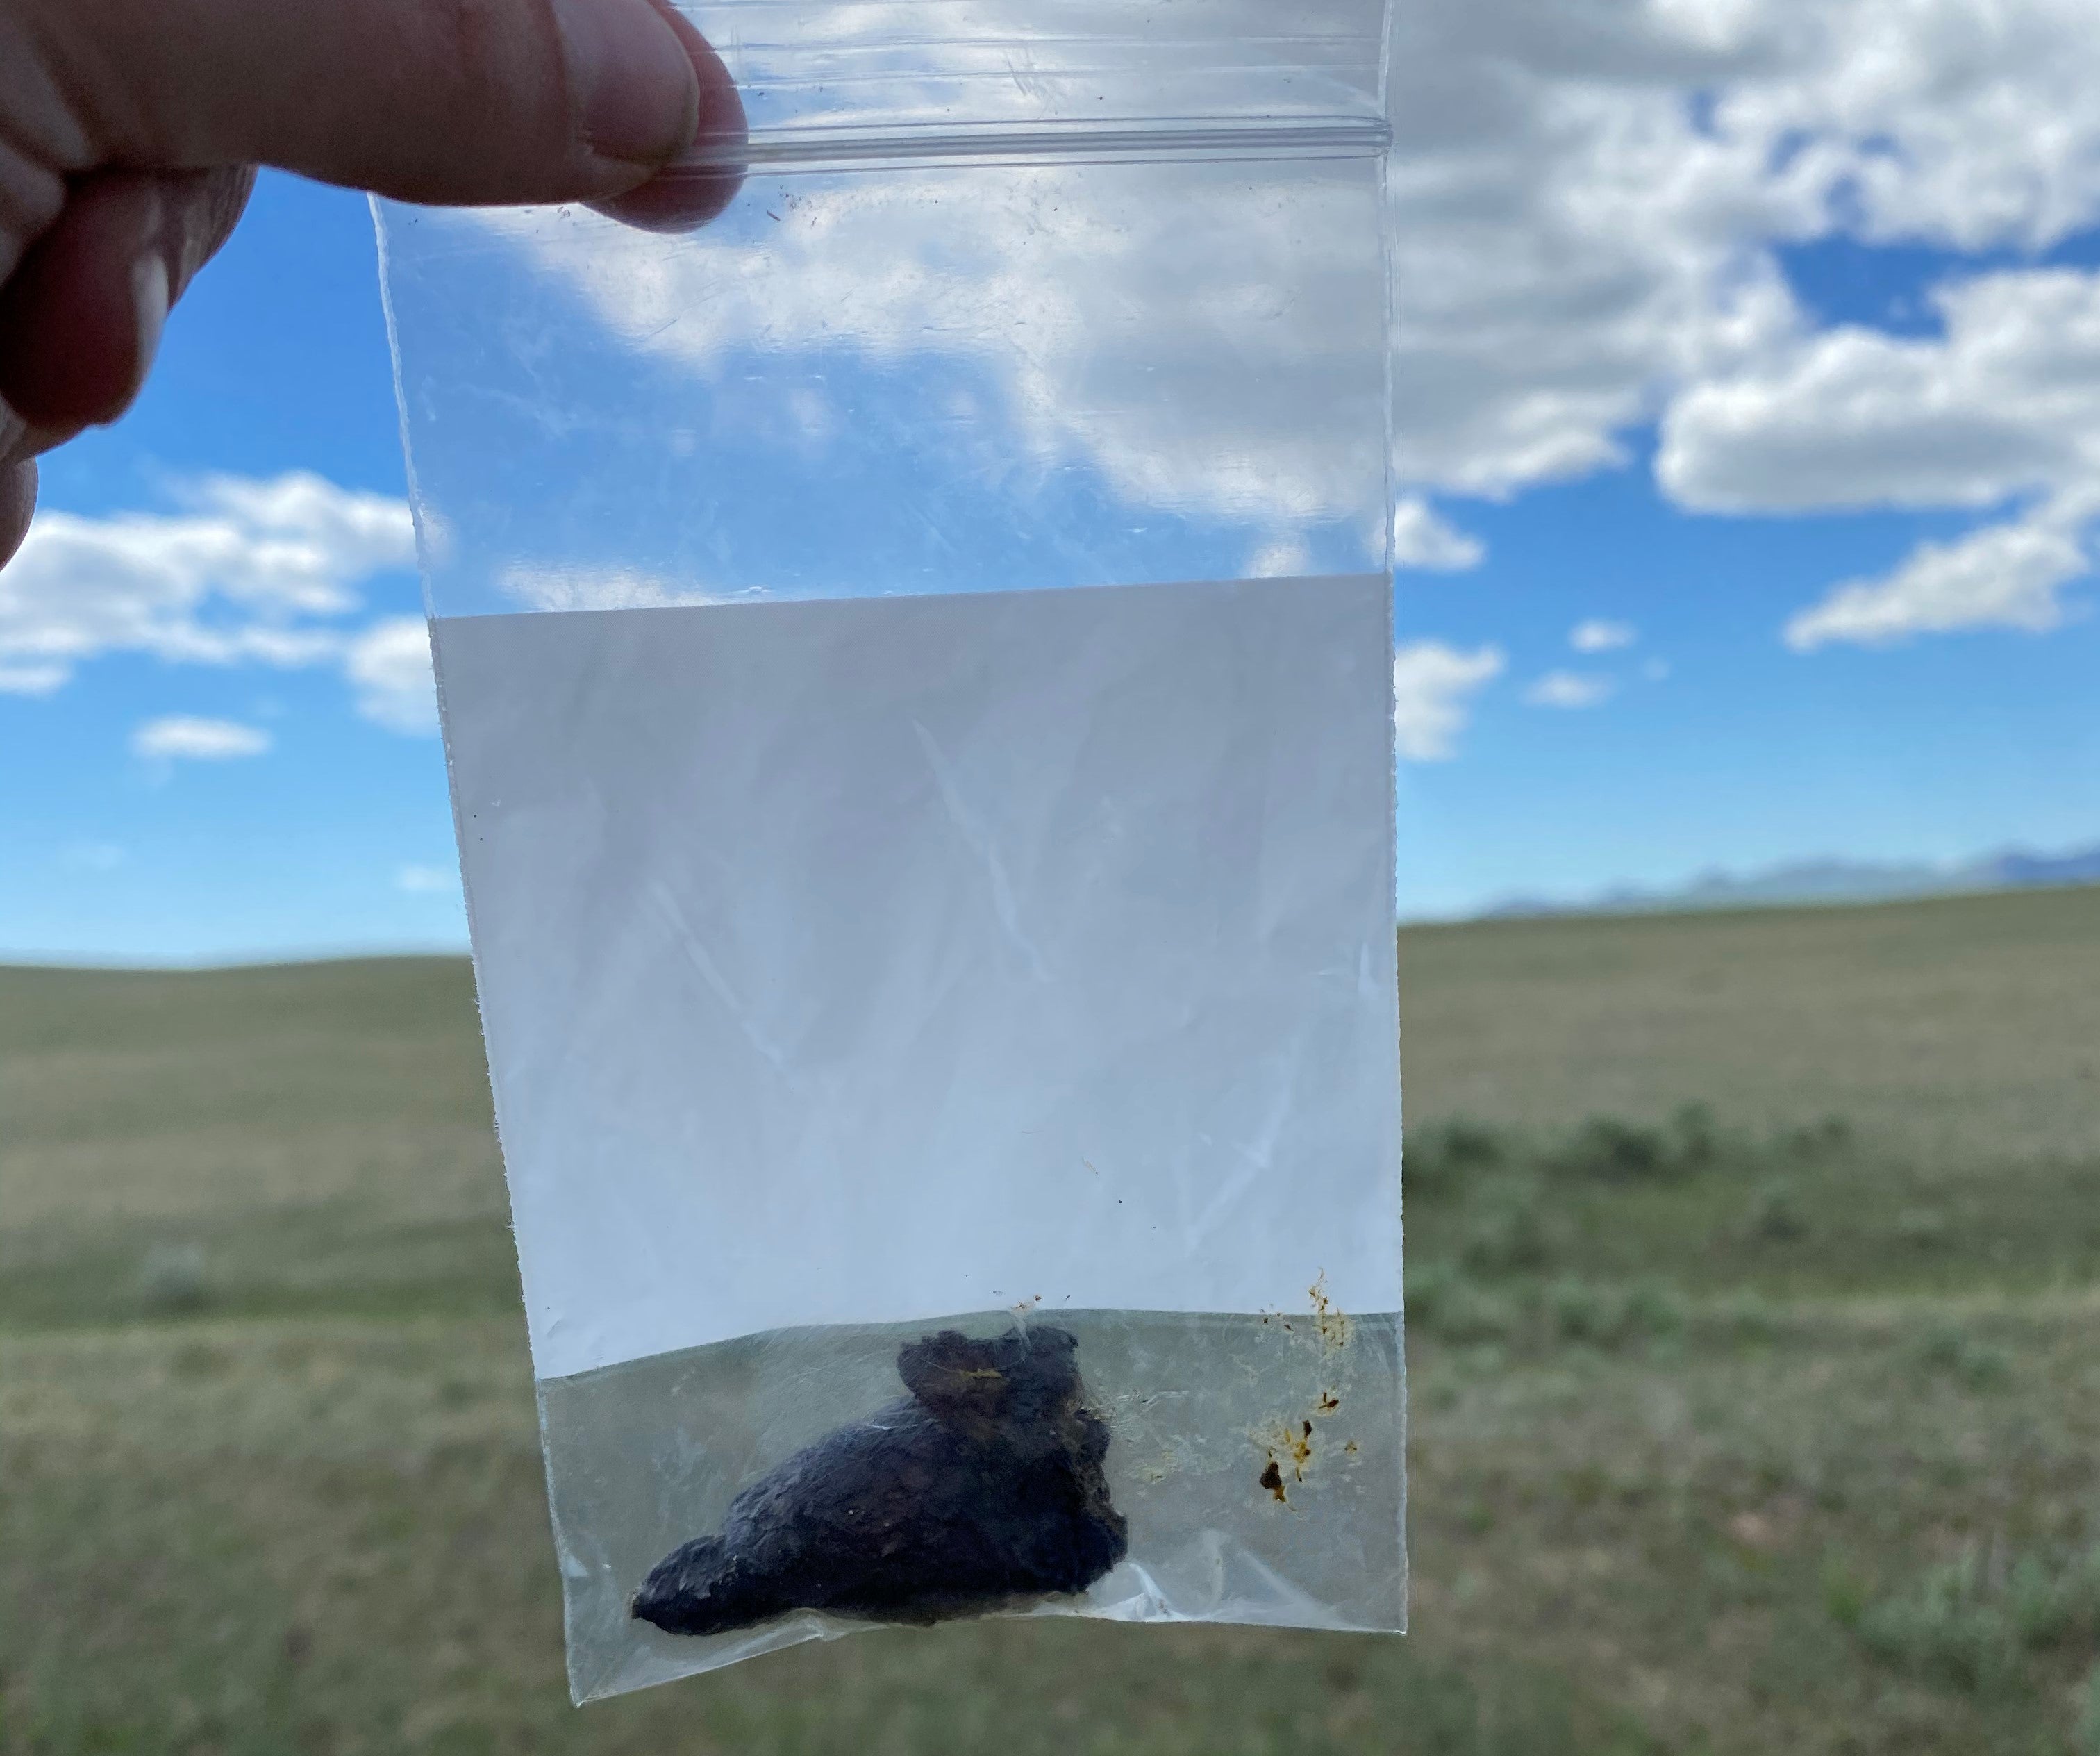 Someone's hand holding a small plastic bag of swift fox scat